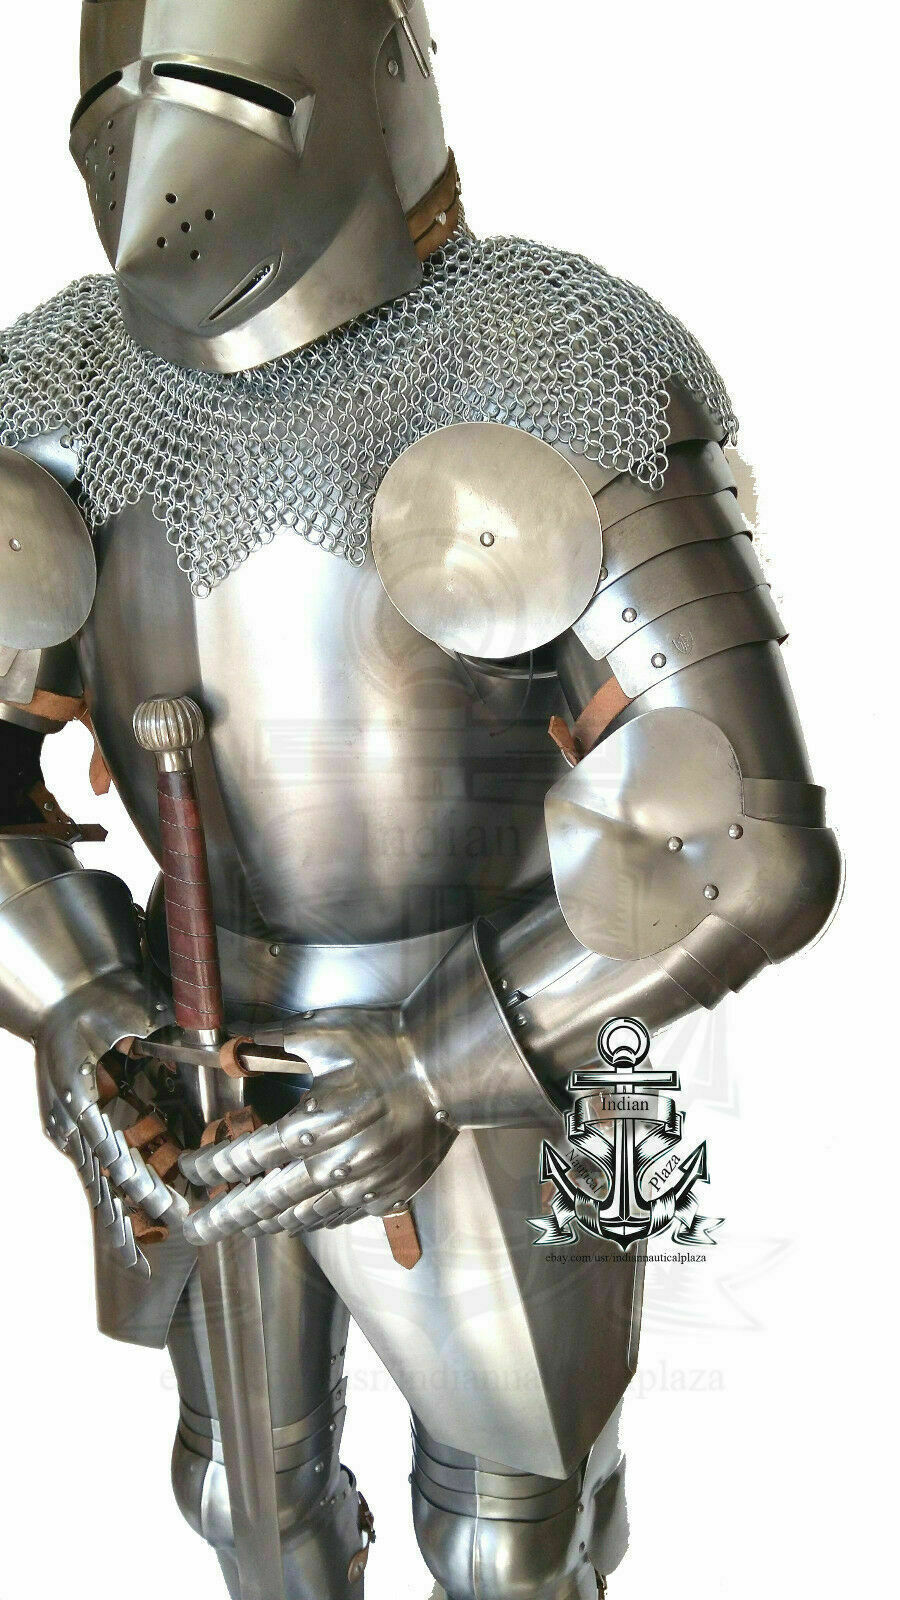 Medieval Knight Suit Of Armor Full Body Armour Suit With Sword Pig Face Helmet